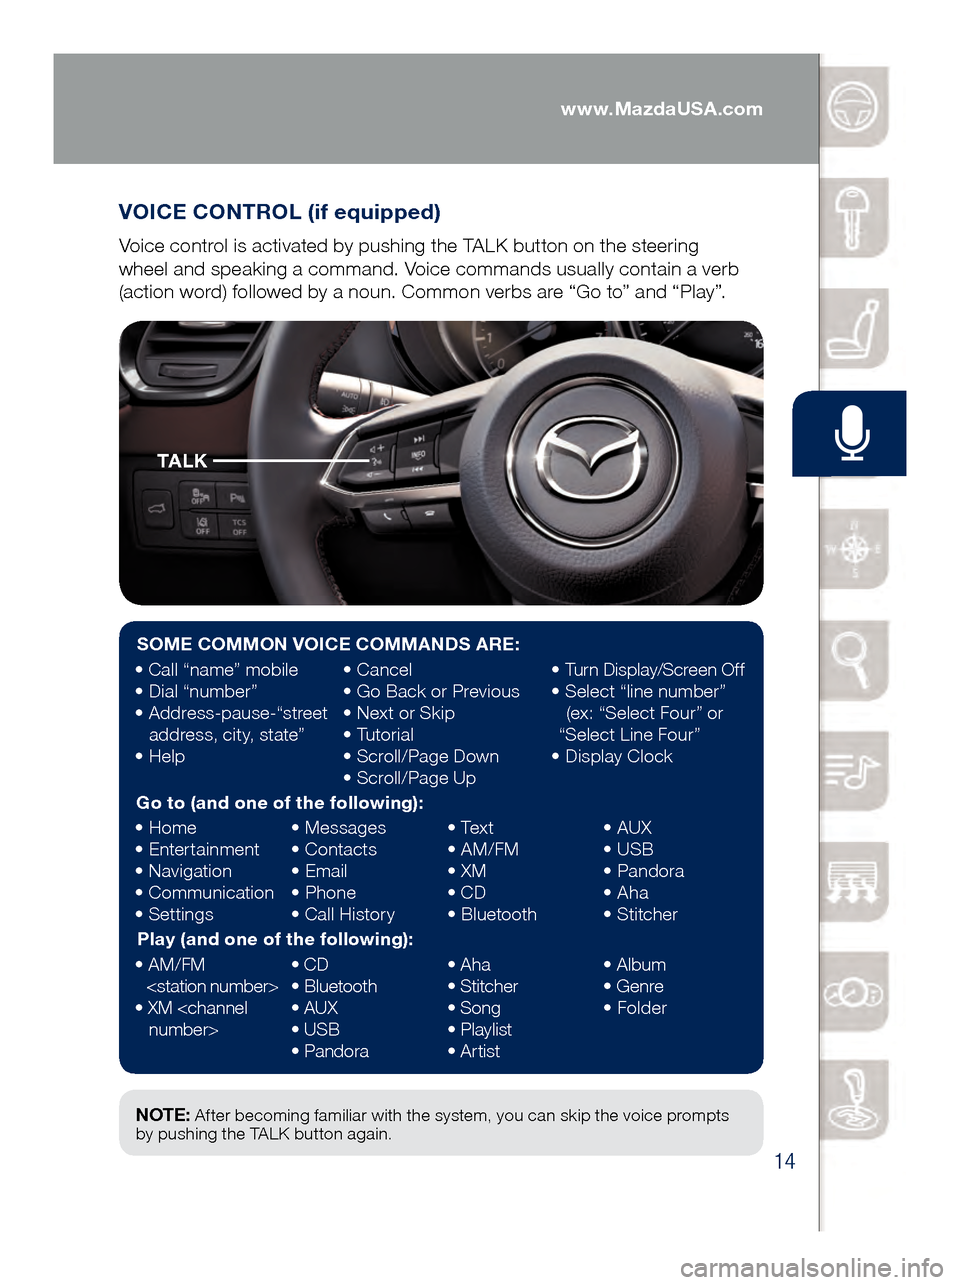 MAZDA MODEL 6 2017  Quick Start Guide (in English) 14
VOICE CONTROL (if equipped)
Voice control is activated by pushing the TALK button on the steering   
wheel and speaking a command. Voice commands usually contain a verb 
(action word) followed by a